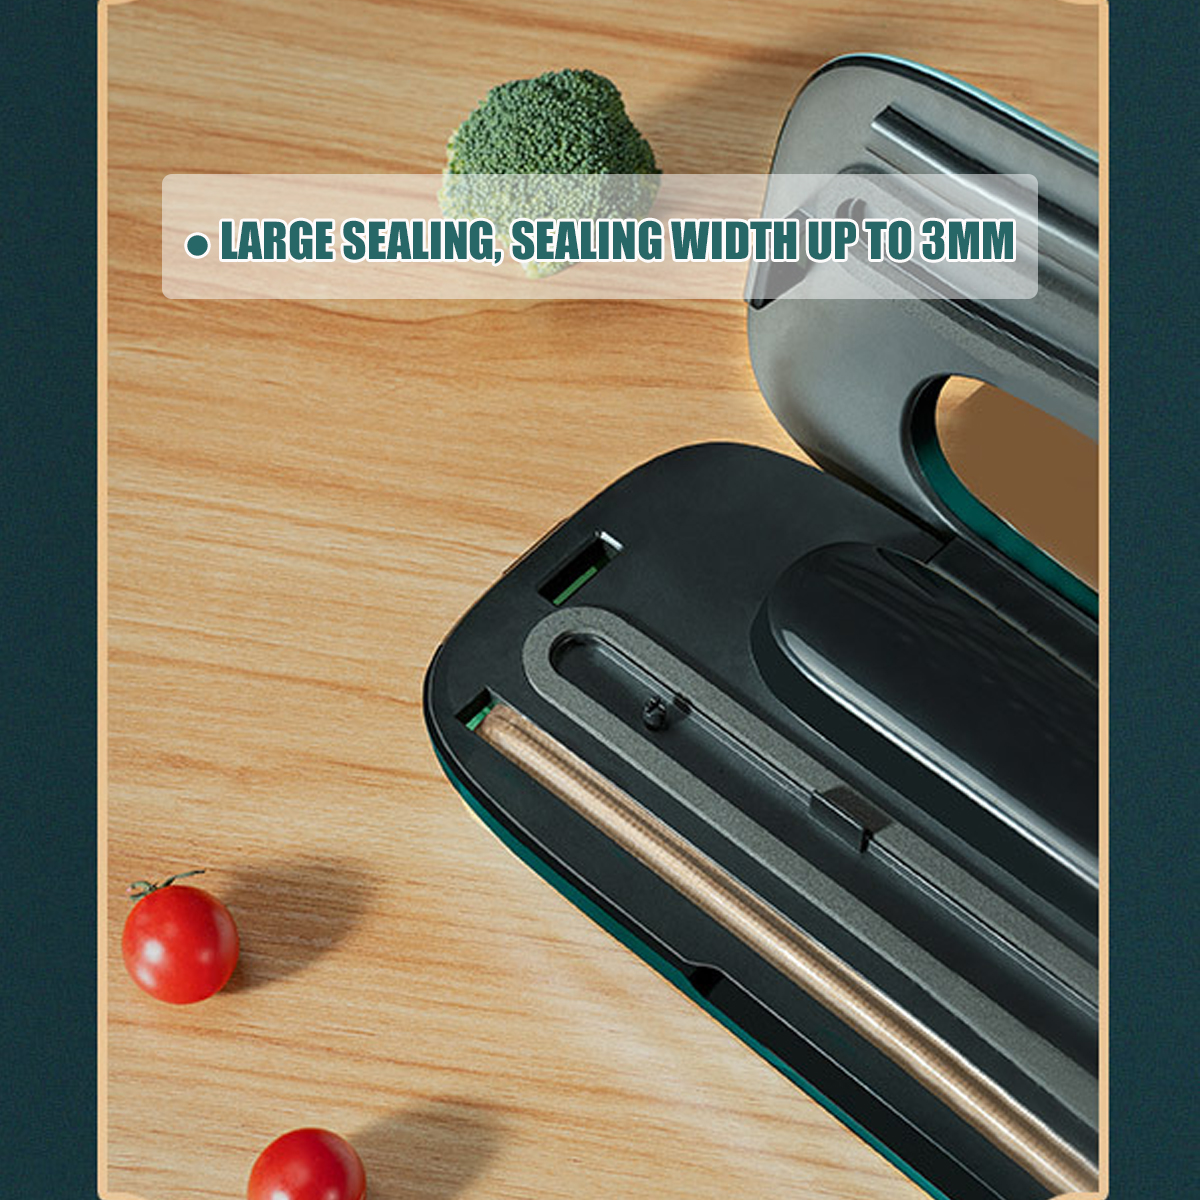 Vacuum-Sealer-Machine-Full-Automatic-Food-Sealer-Air-Sealing-System-for-Food-Storage-3-Functions-Ove-1928369-8